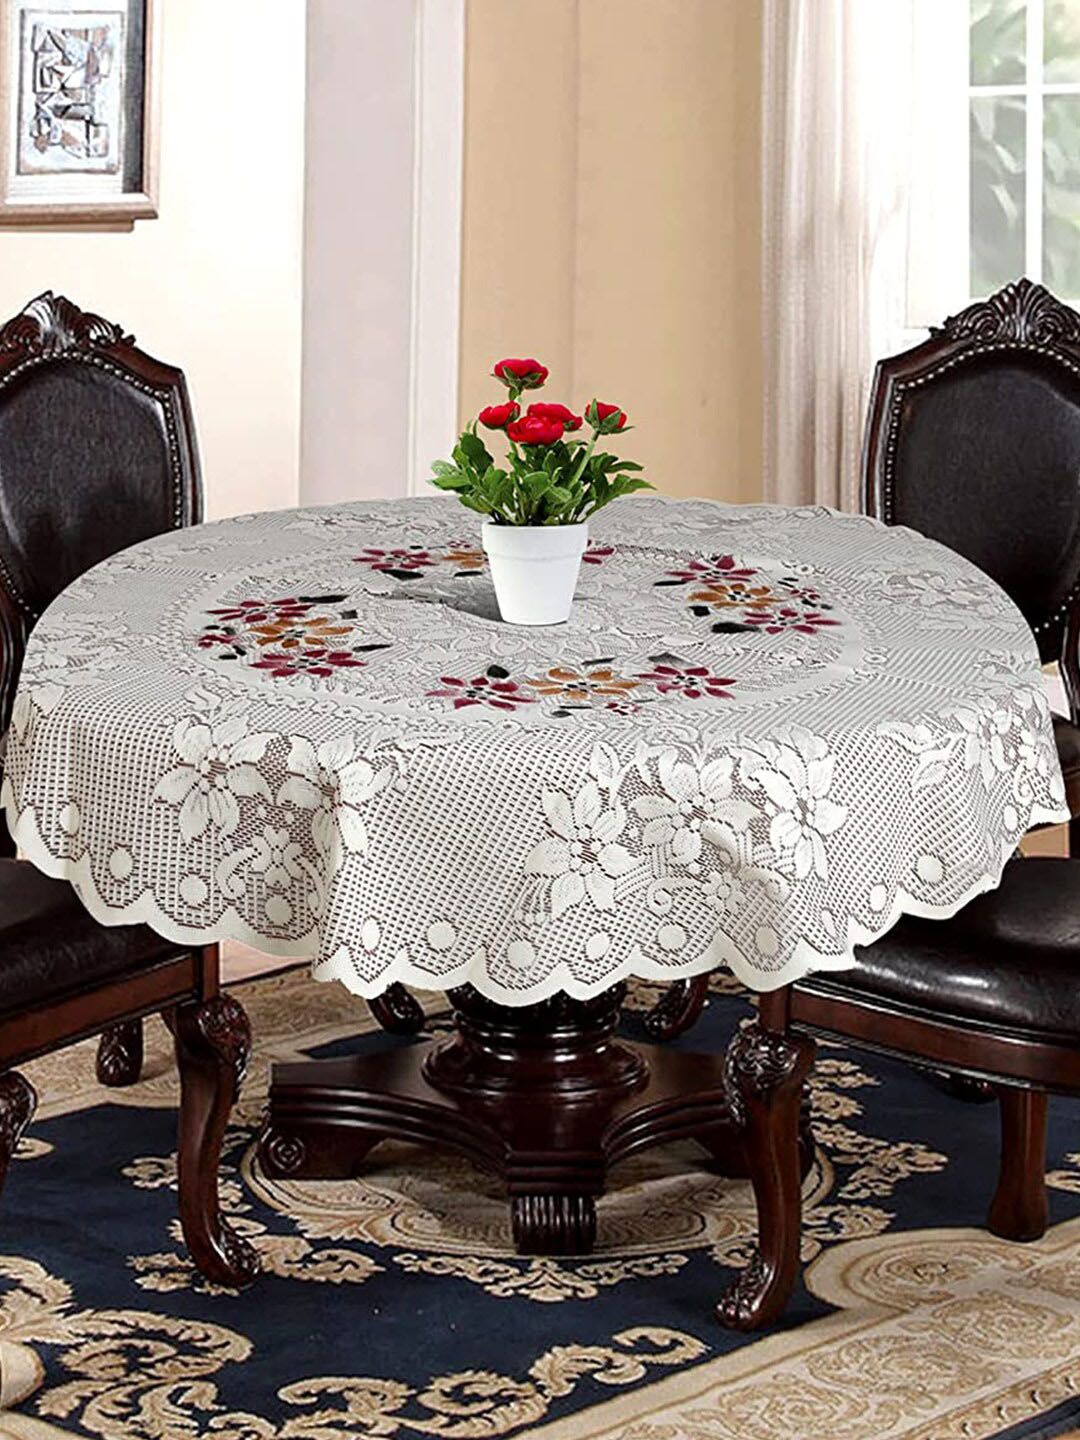 Kuber Industries Unisex White Flower Printed Round Table Cover Price in India